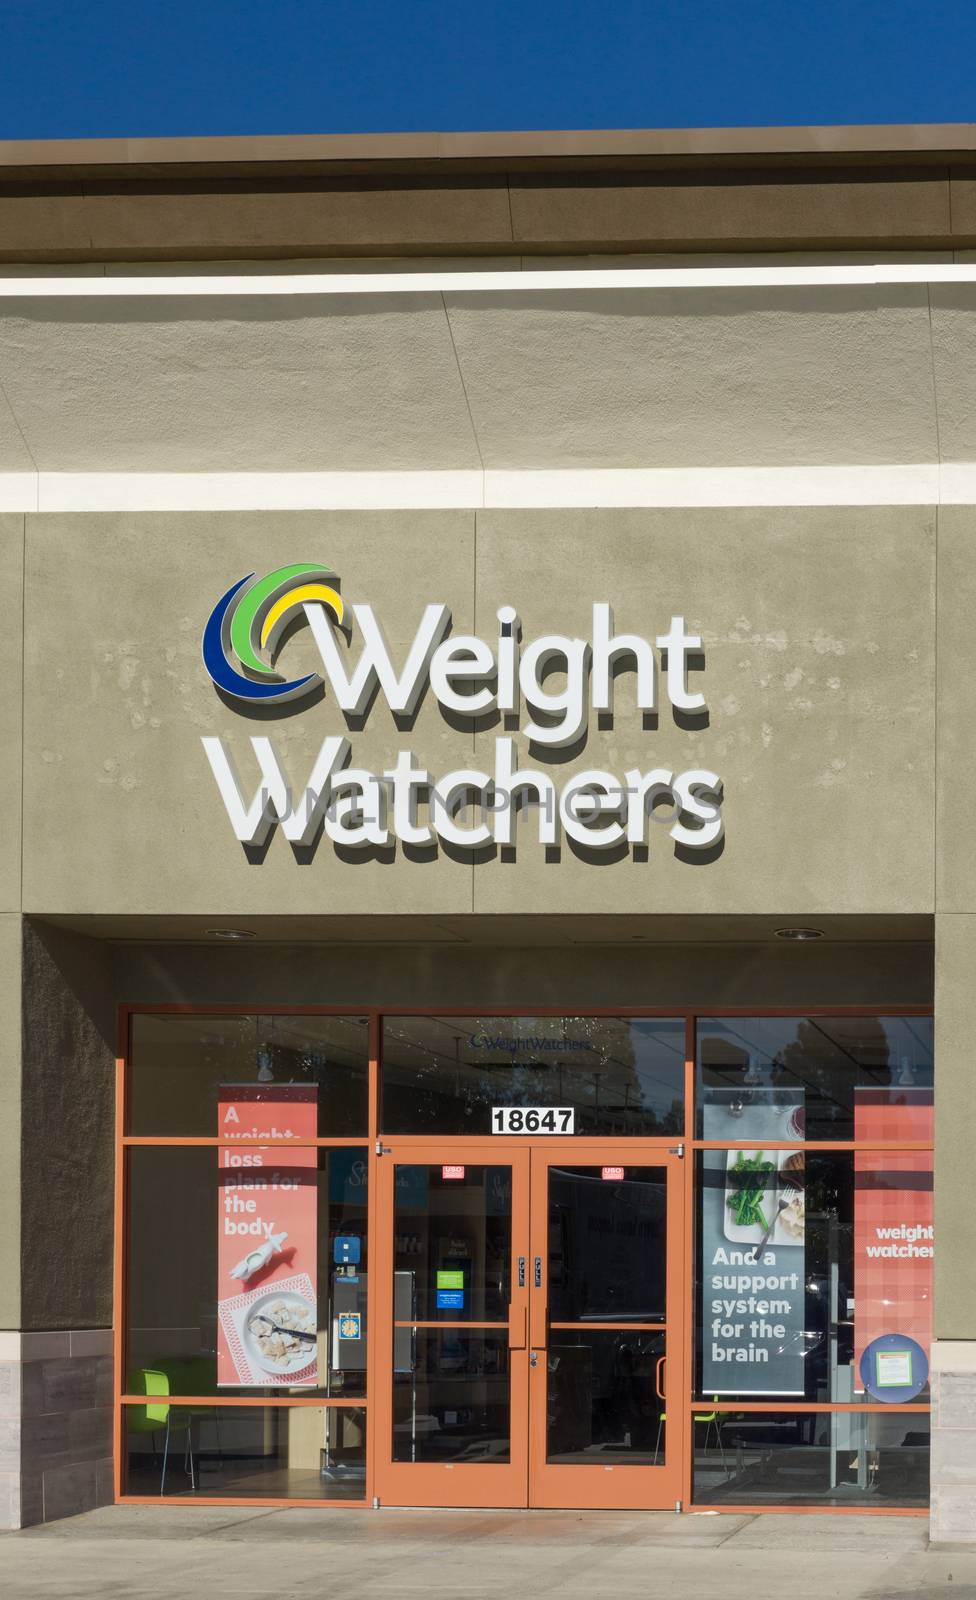 Weight Waters Exterior and Sign by wolterk